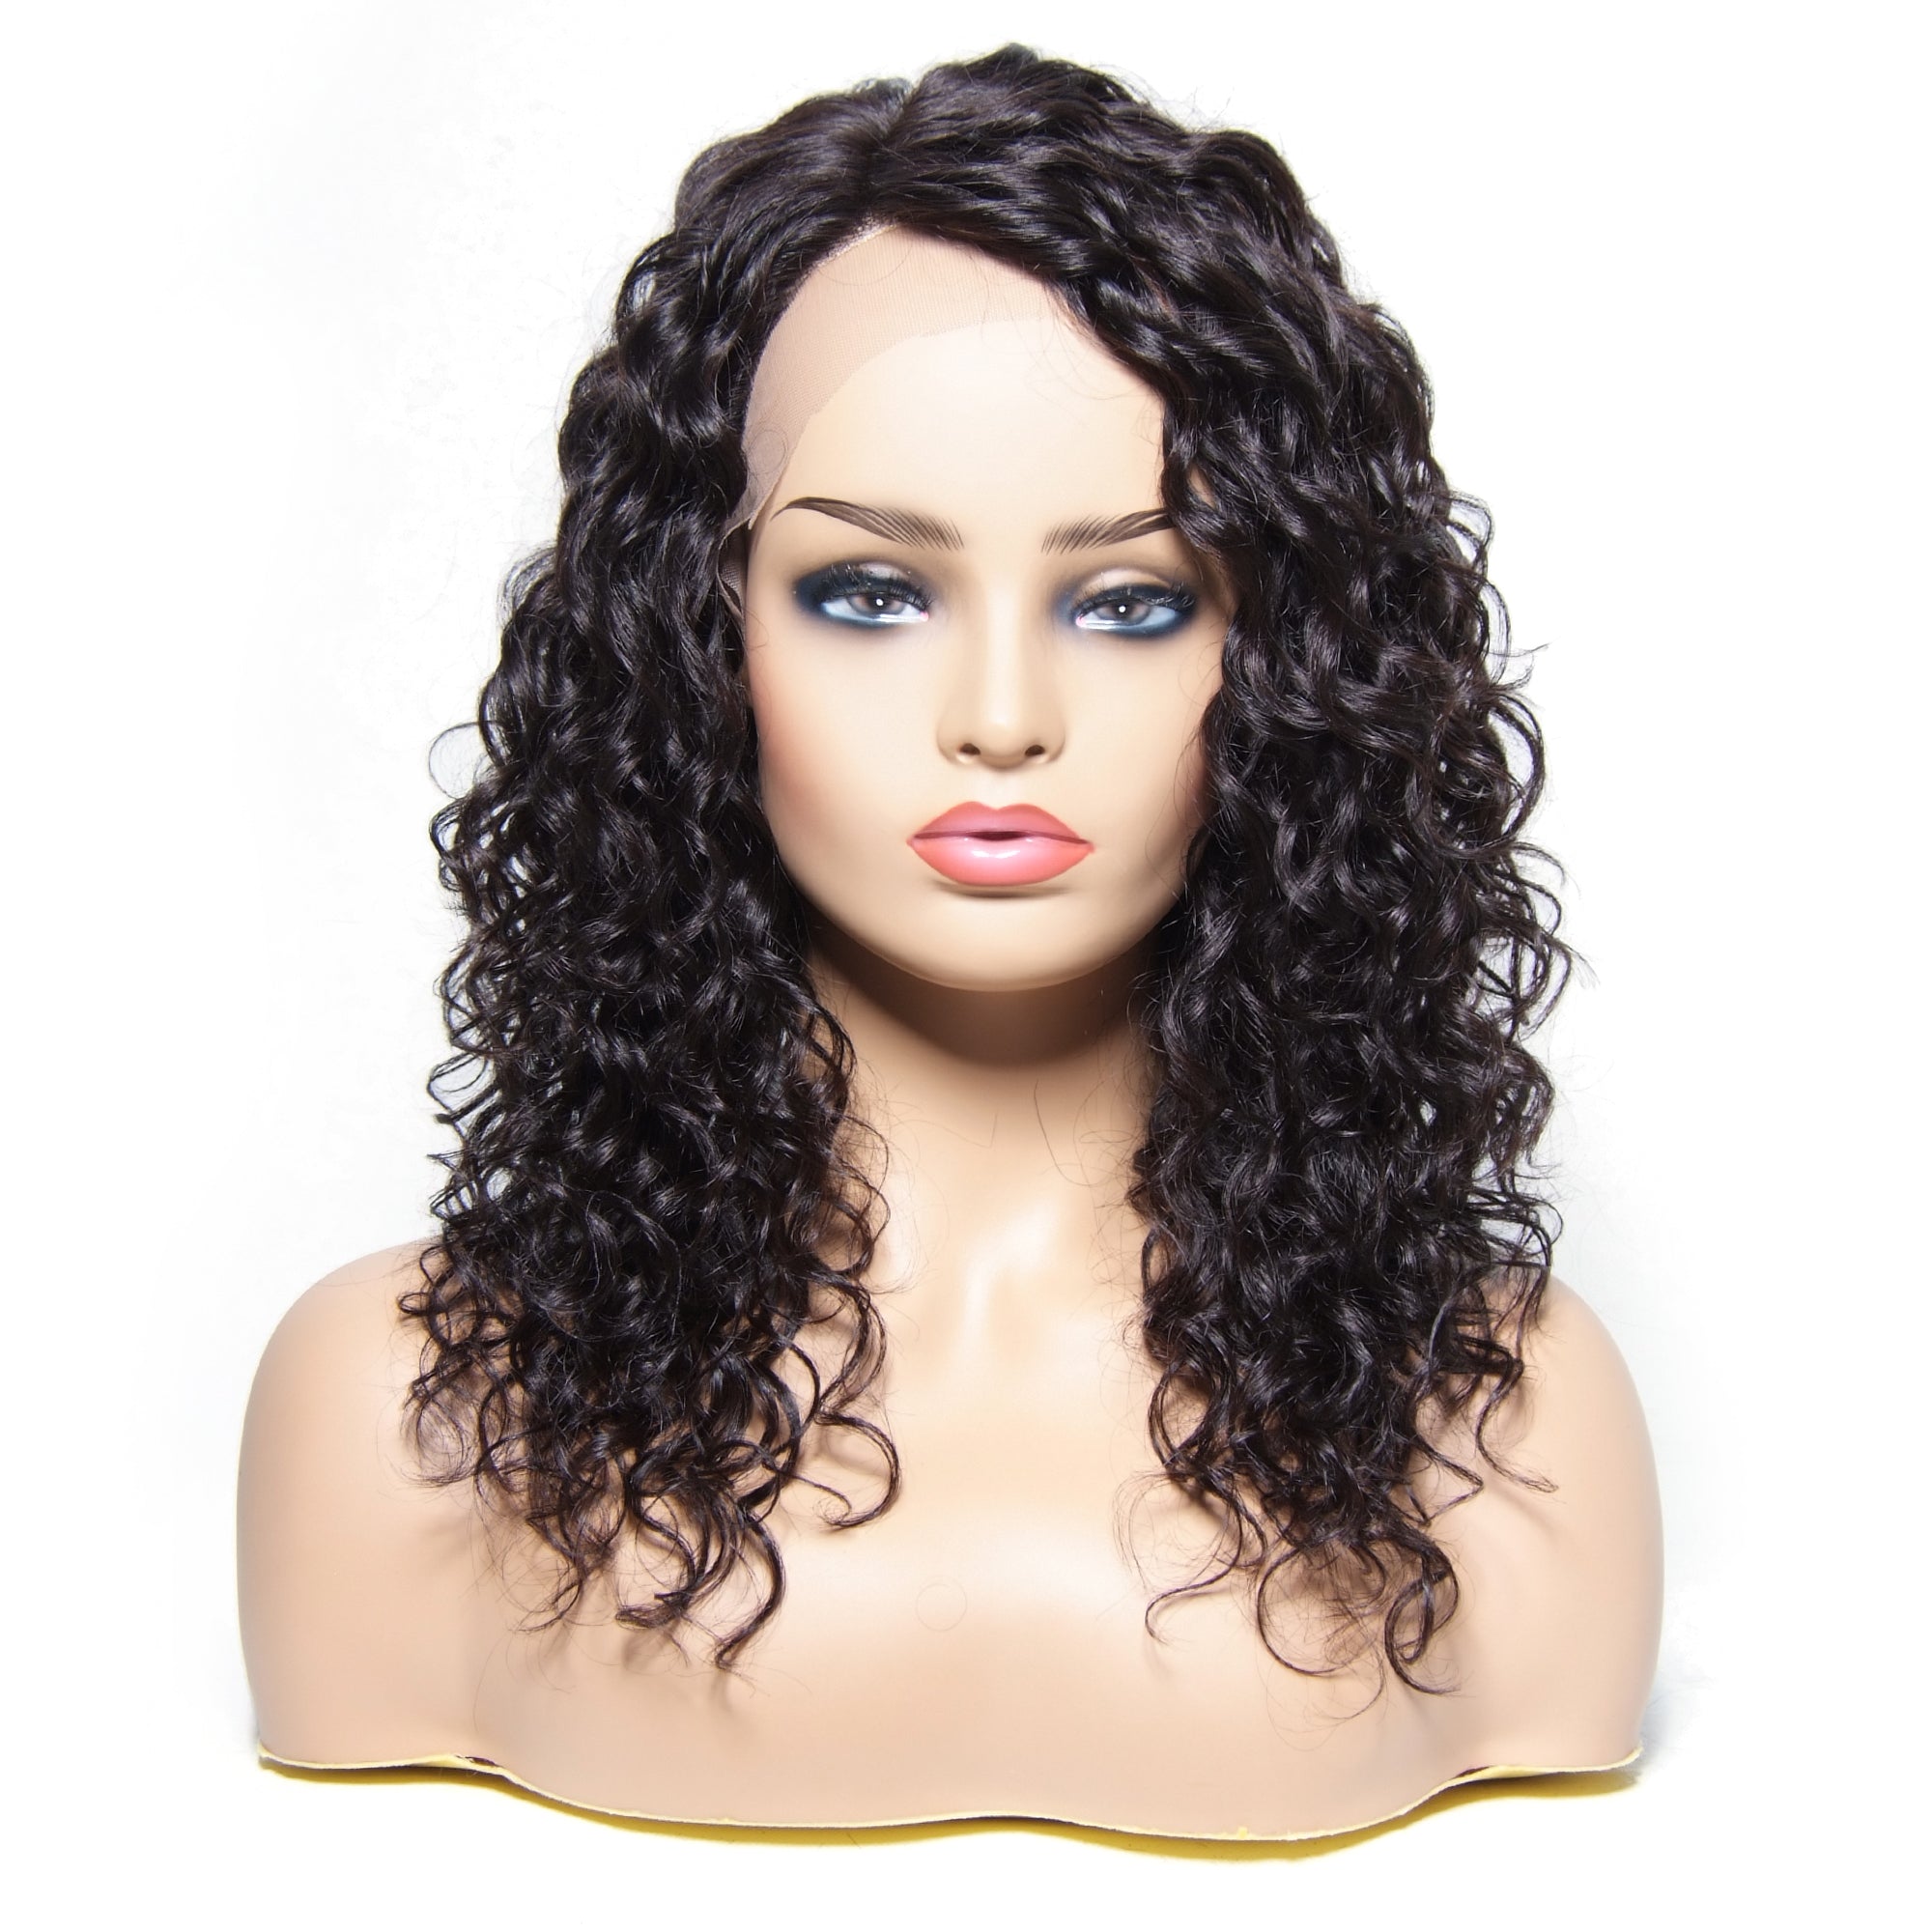 Water Wave Lace Front Human Hair Wig Free Part With Baby Hair For Woman - MSBEAUTY HAIR